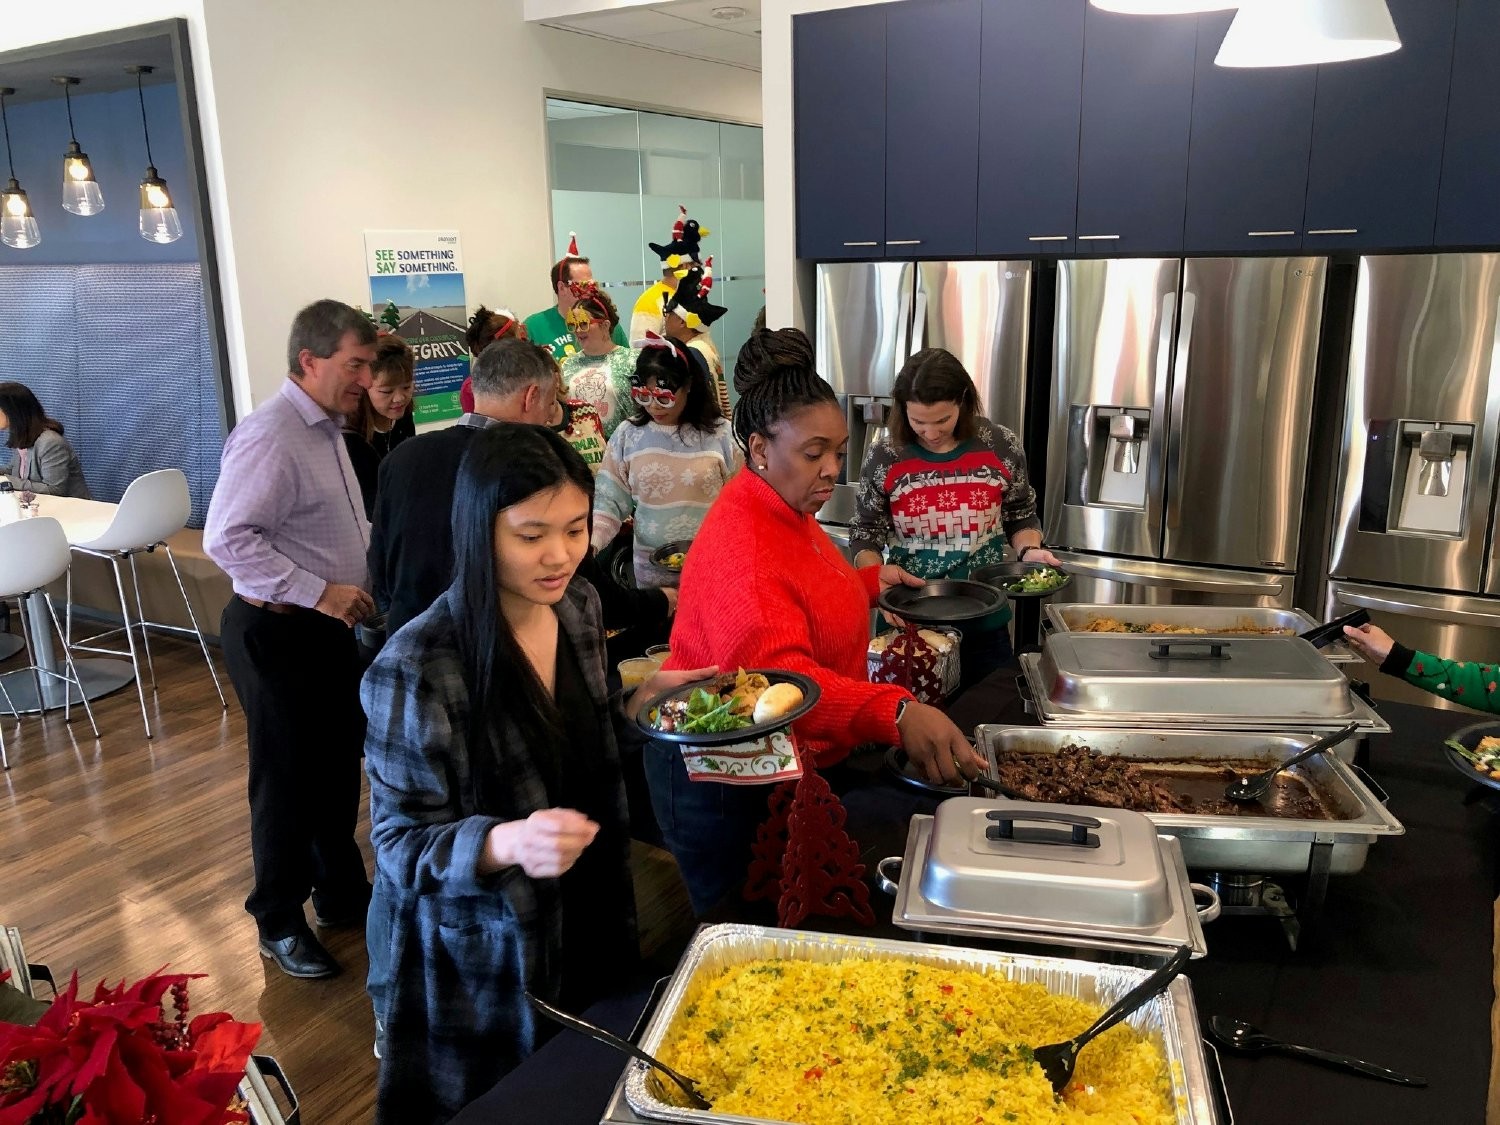 We catered lunch at the office for the holidays.